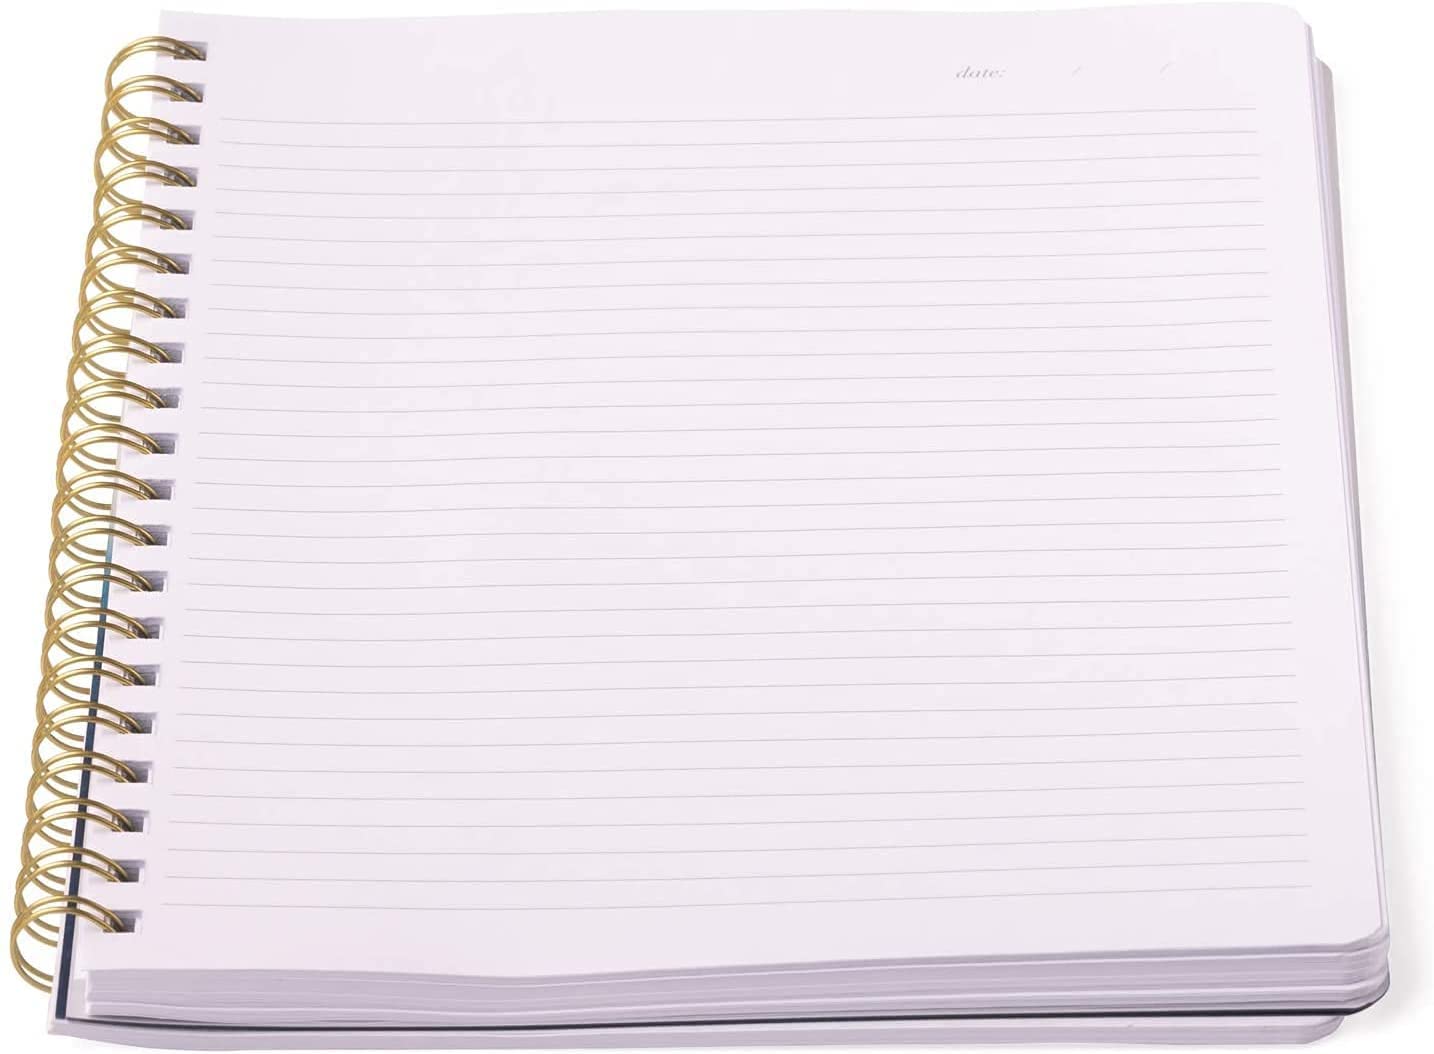 Double Spiral Eccolo Notebook with Poly Notebook Cover